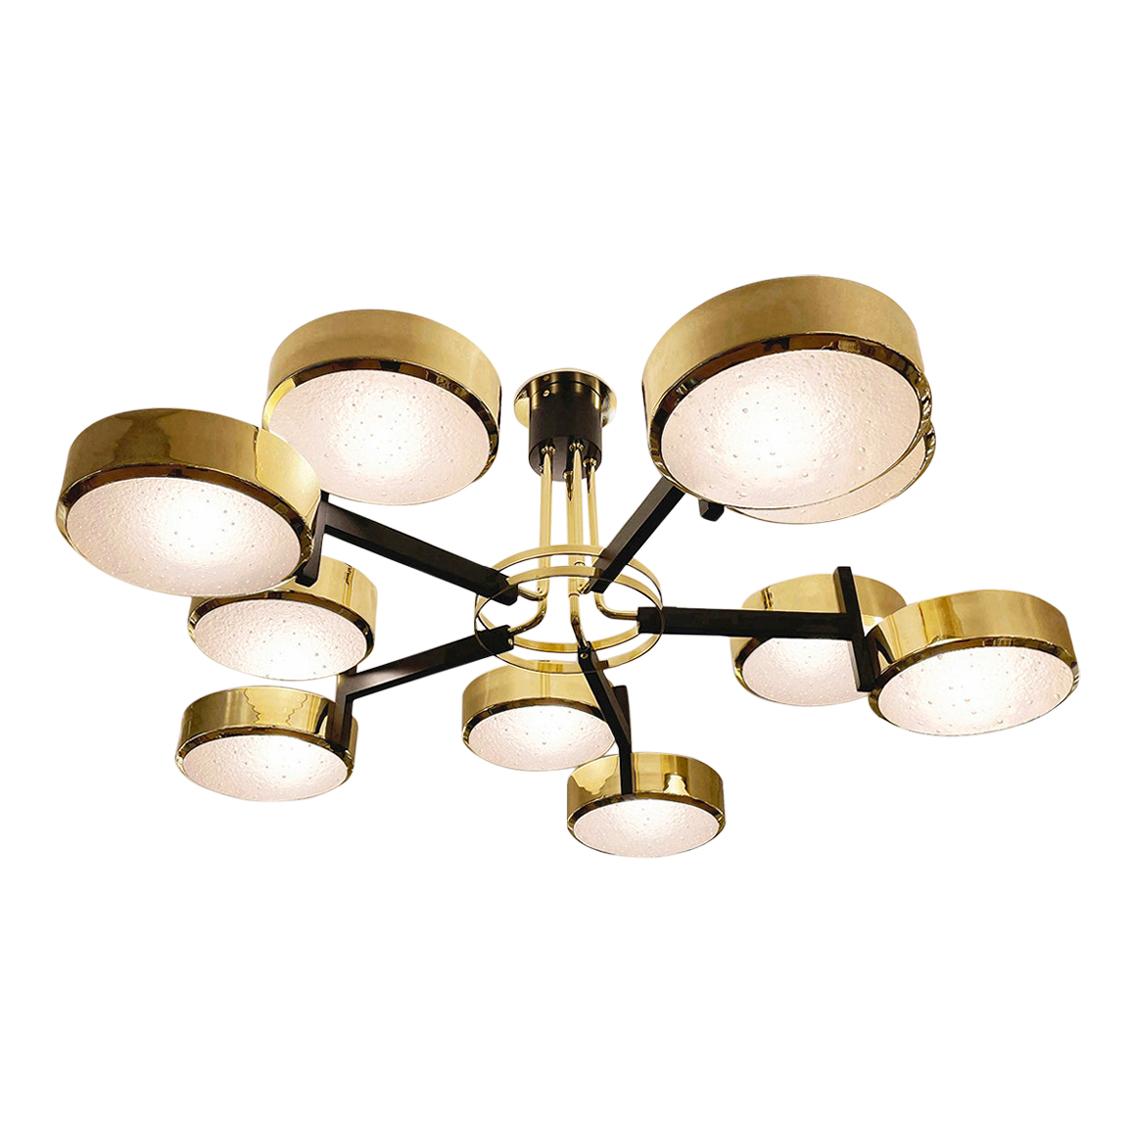 Eclissi Grande Ceiling Light by Gaspare Asaro. Murano Glass Version For Sale